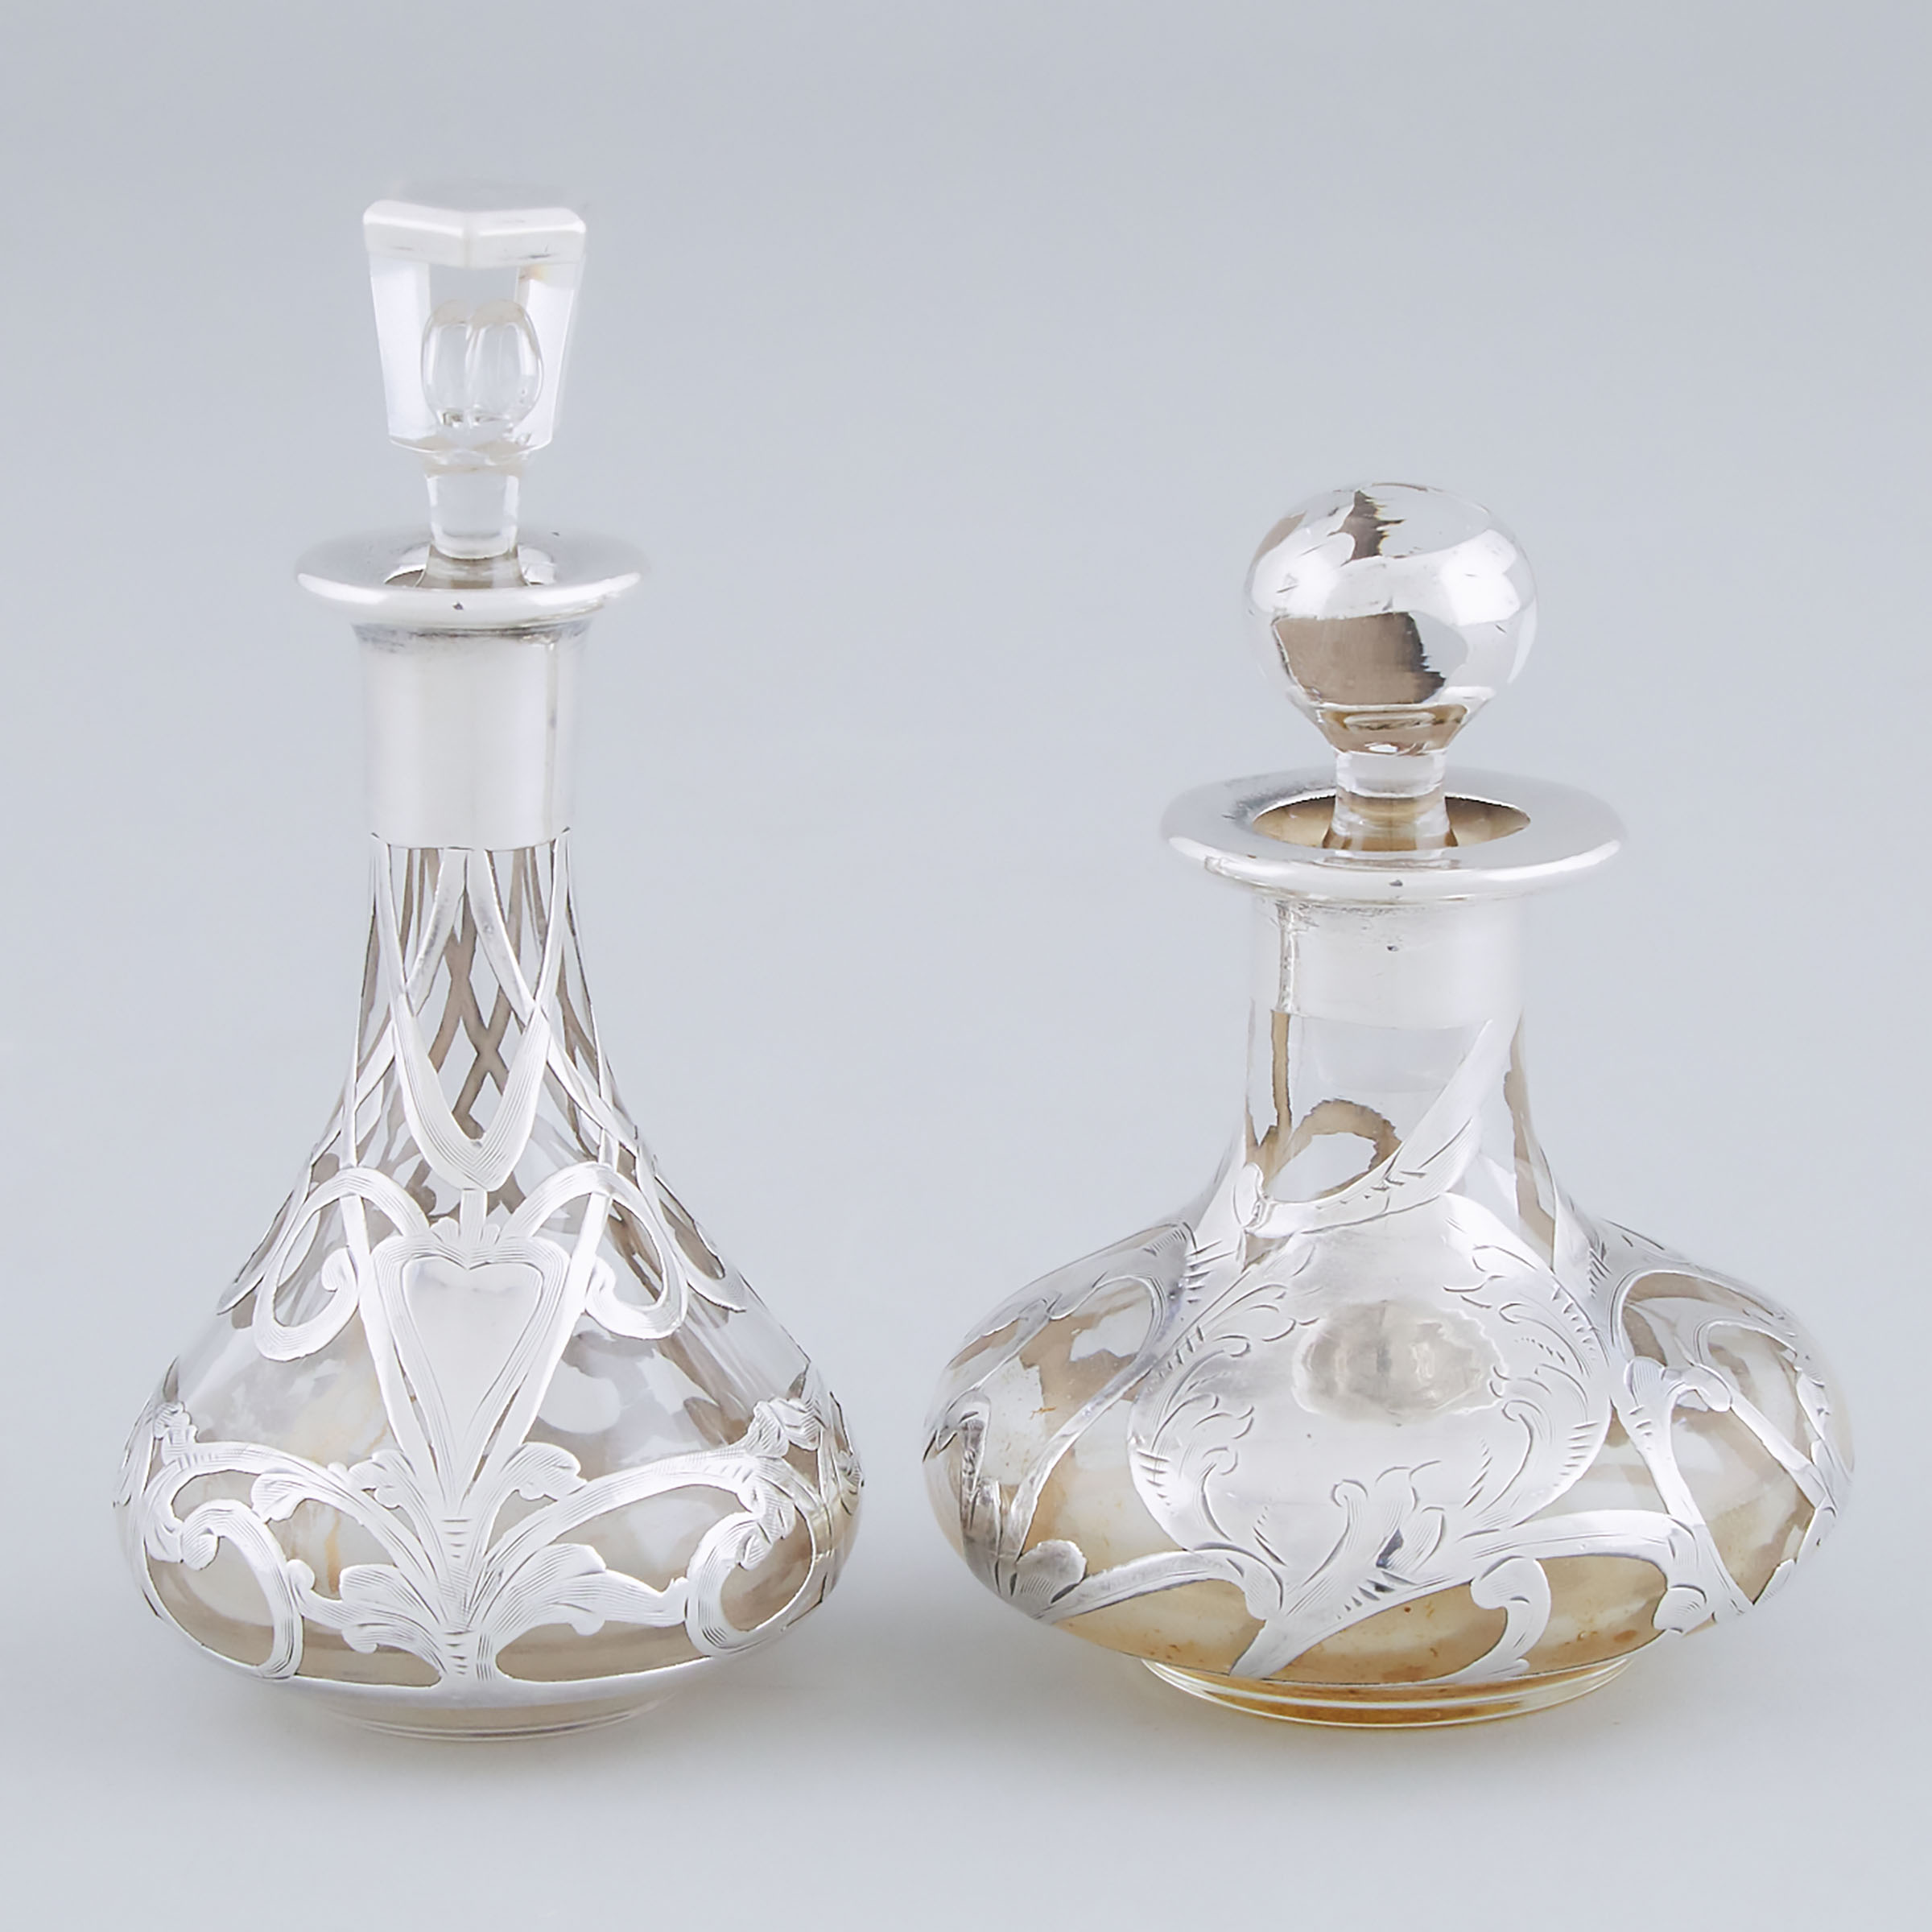 Two American Silver Overlaid Glass Perfume Bottles, early 20th century